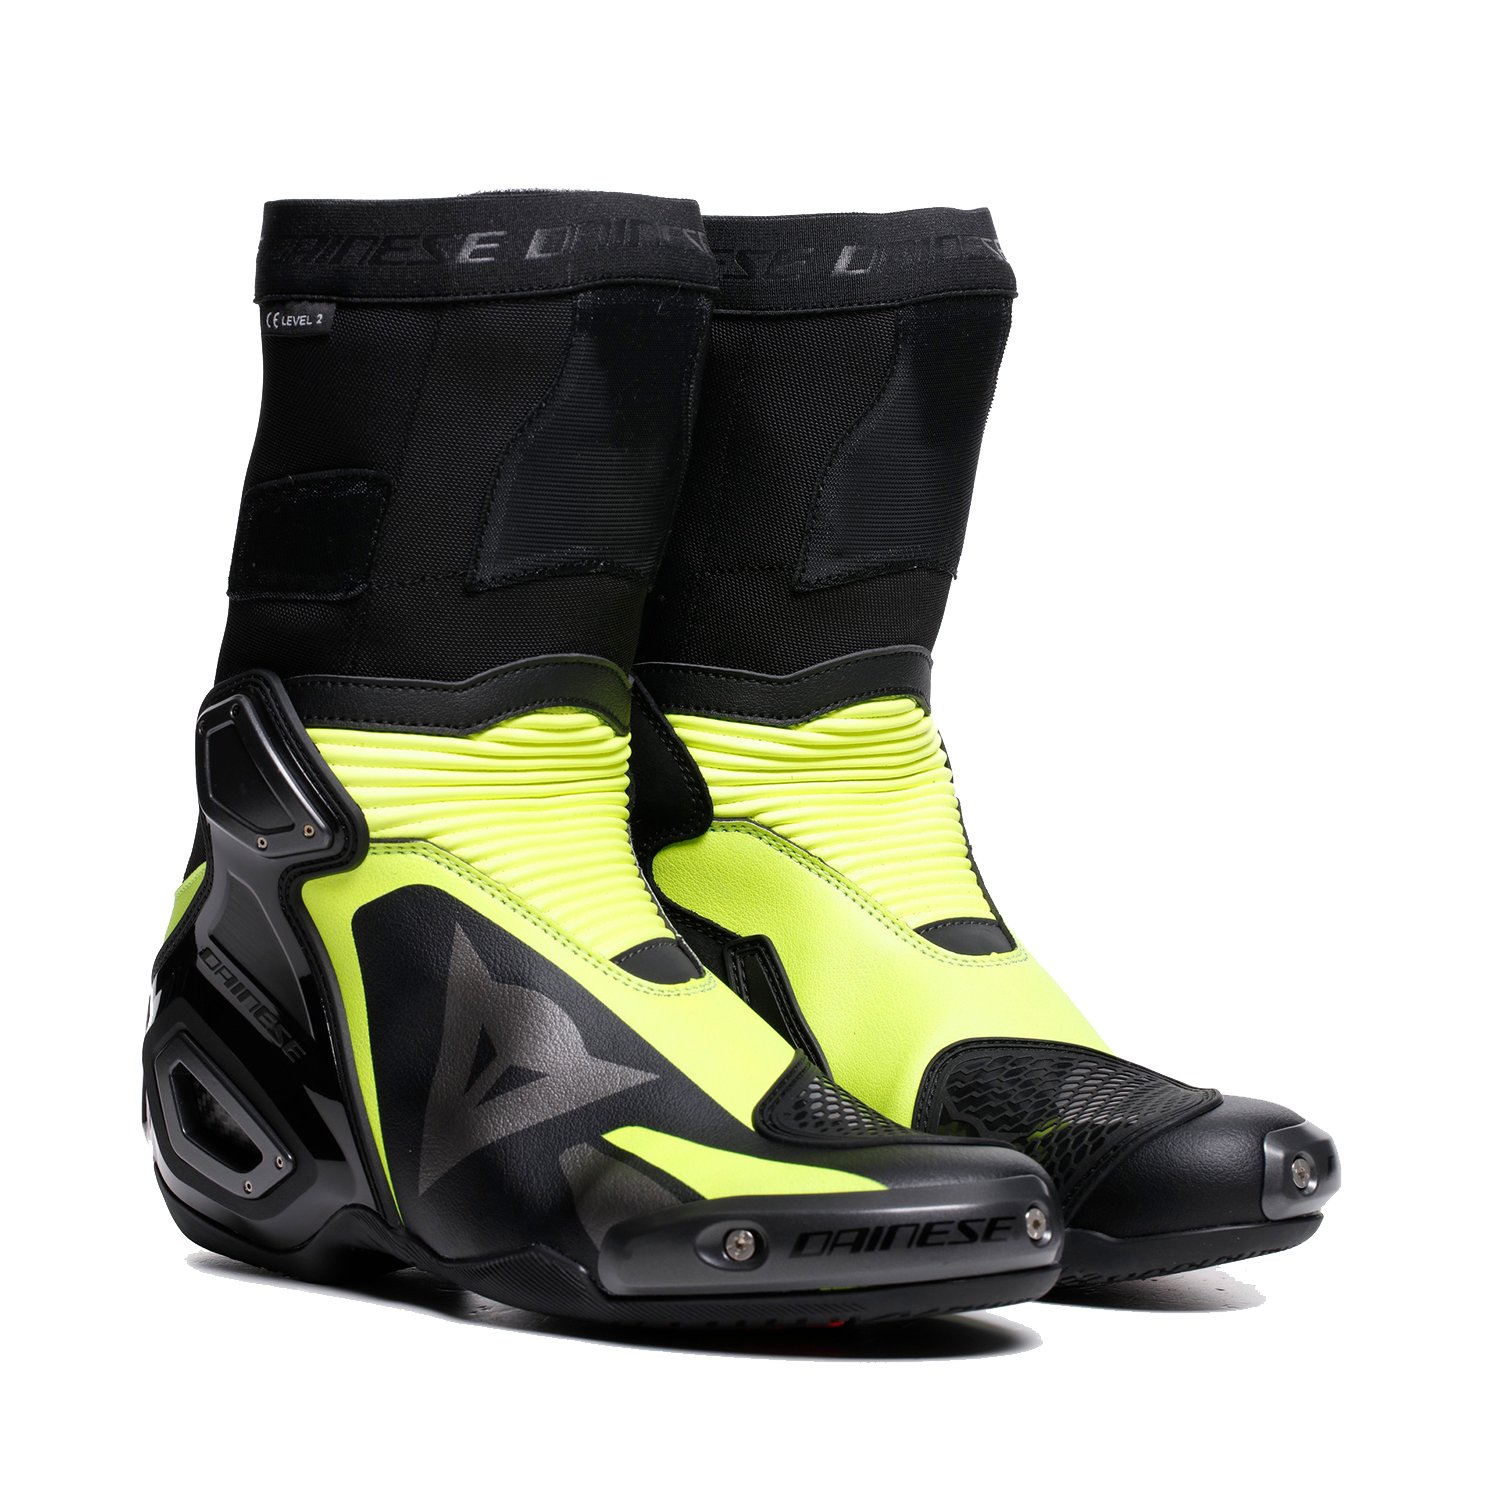 Image of Dainese Axial 2 Boots Black Yellow Fluo Size 43 EN